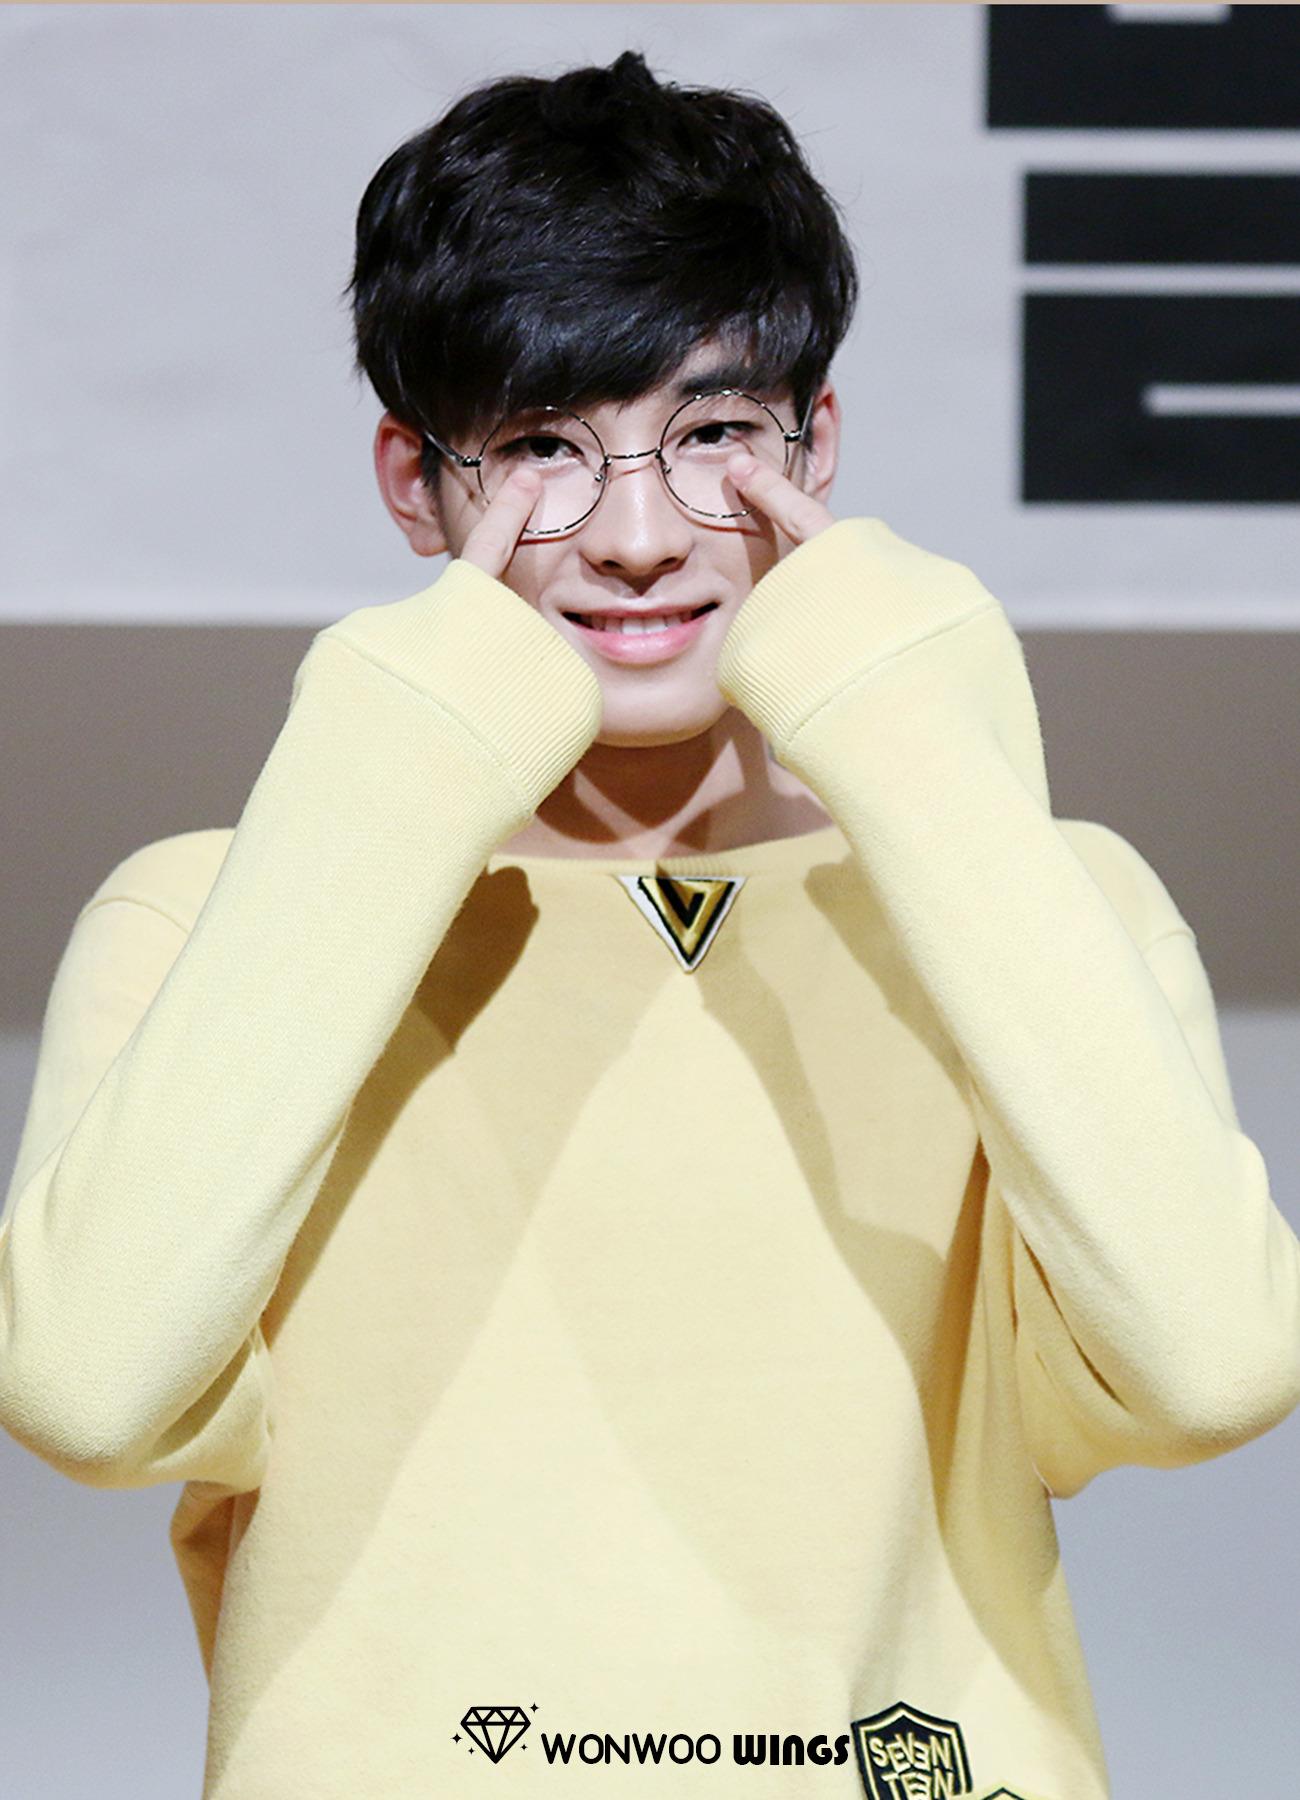 Wonwoo proves that his glasses are really for his bad vision by touching them. 